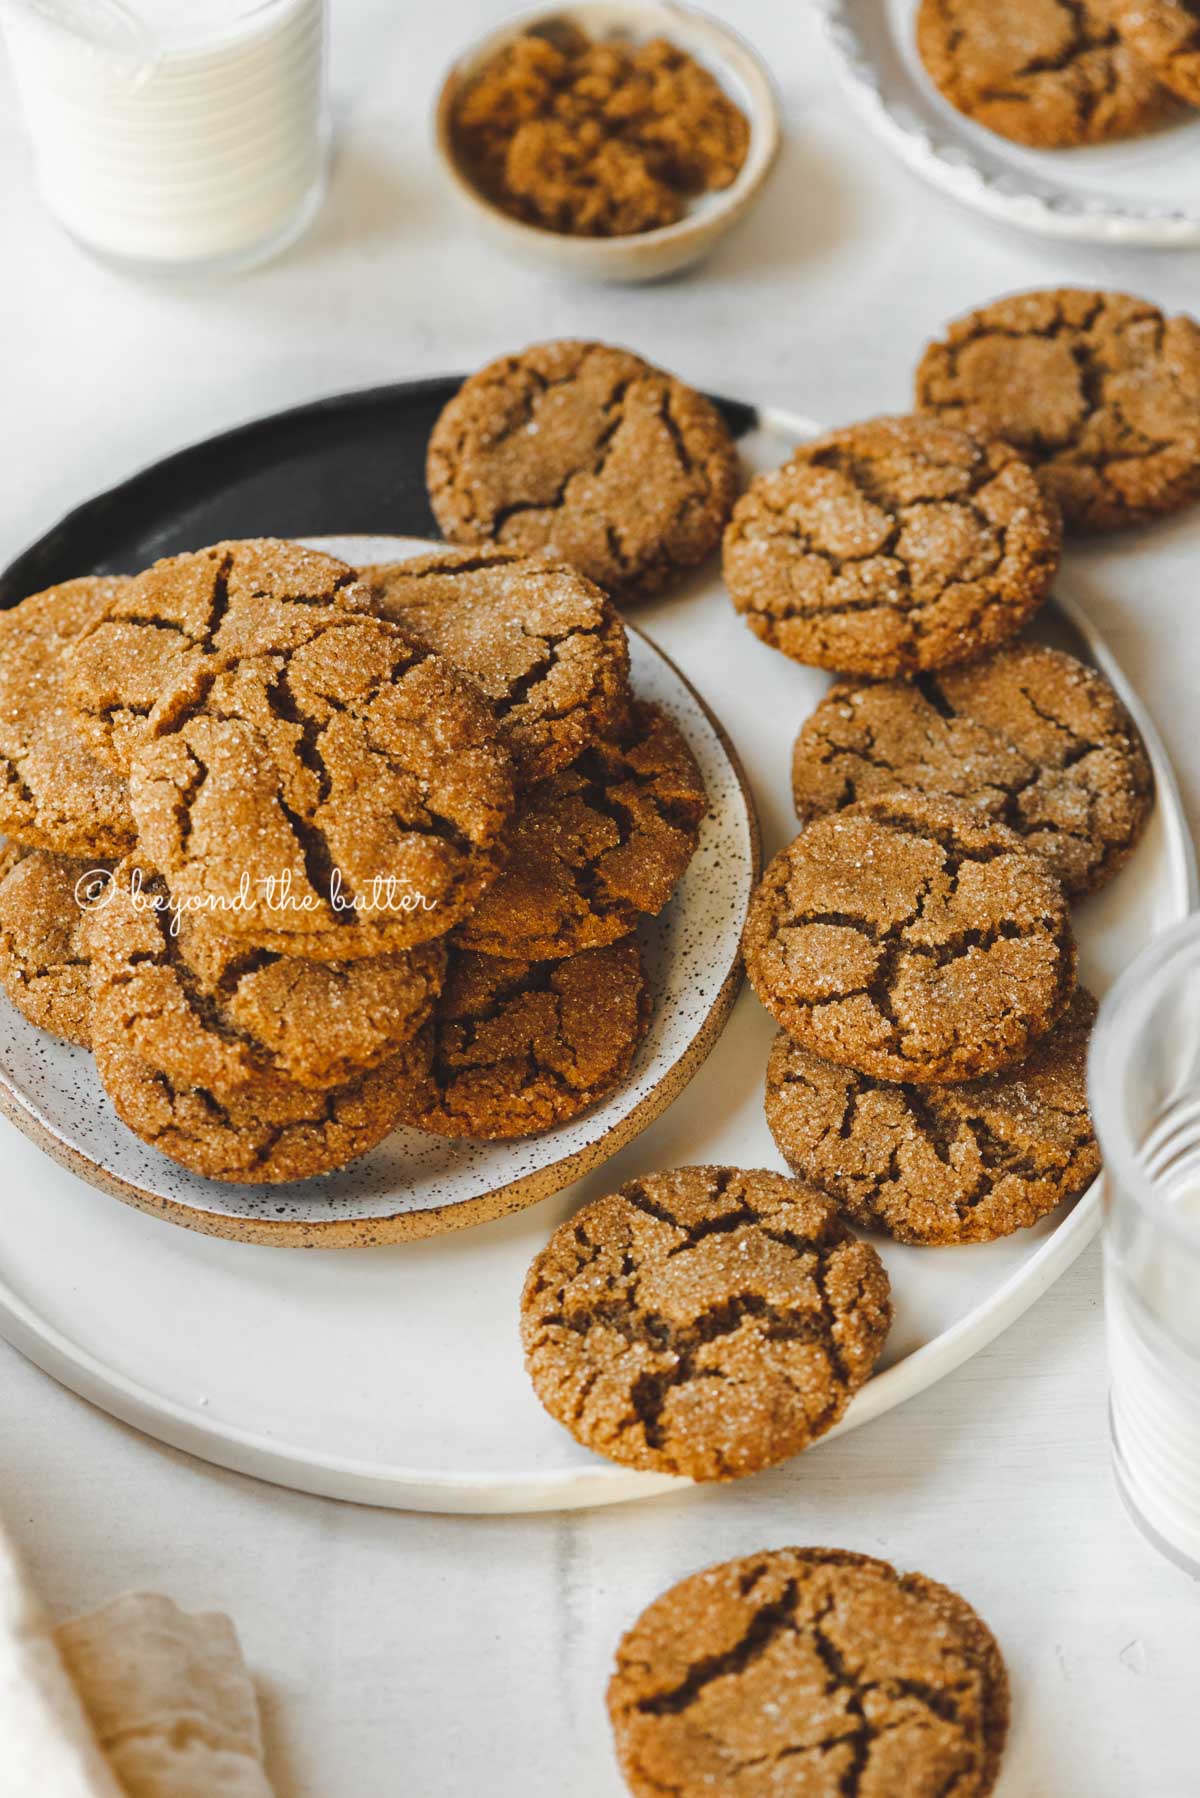 Small plate of molasses cookies placed on a larger plate filled with soft molasses cookies and one that is half eaten | All Images © Beyond the Butter™